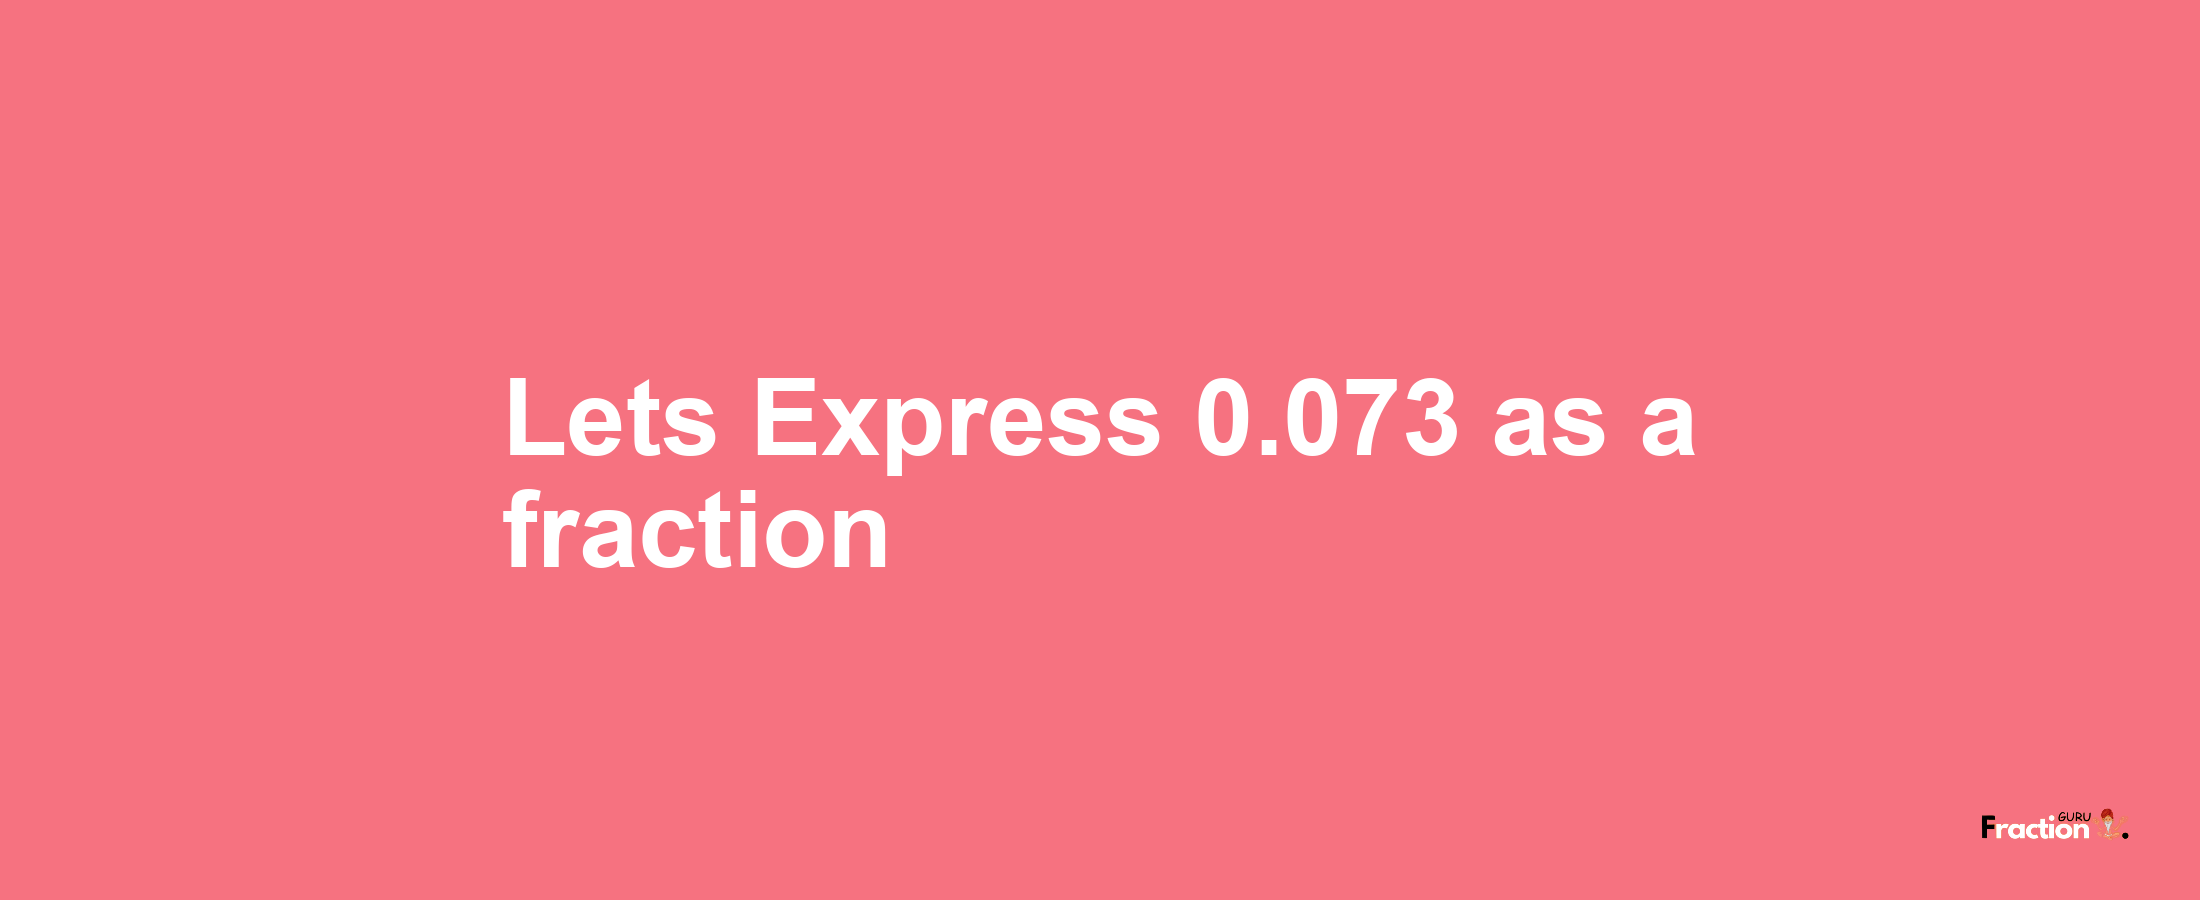 Lets Express 0.073 as afraction